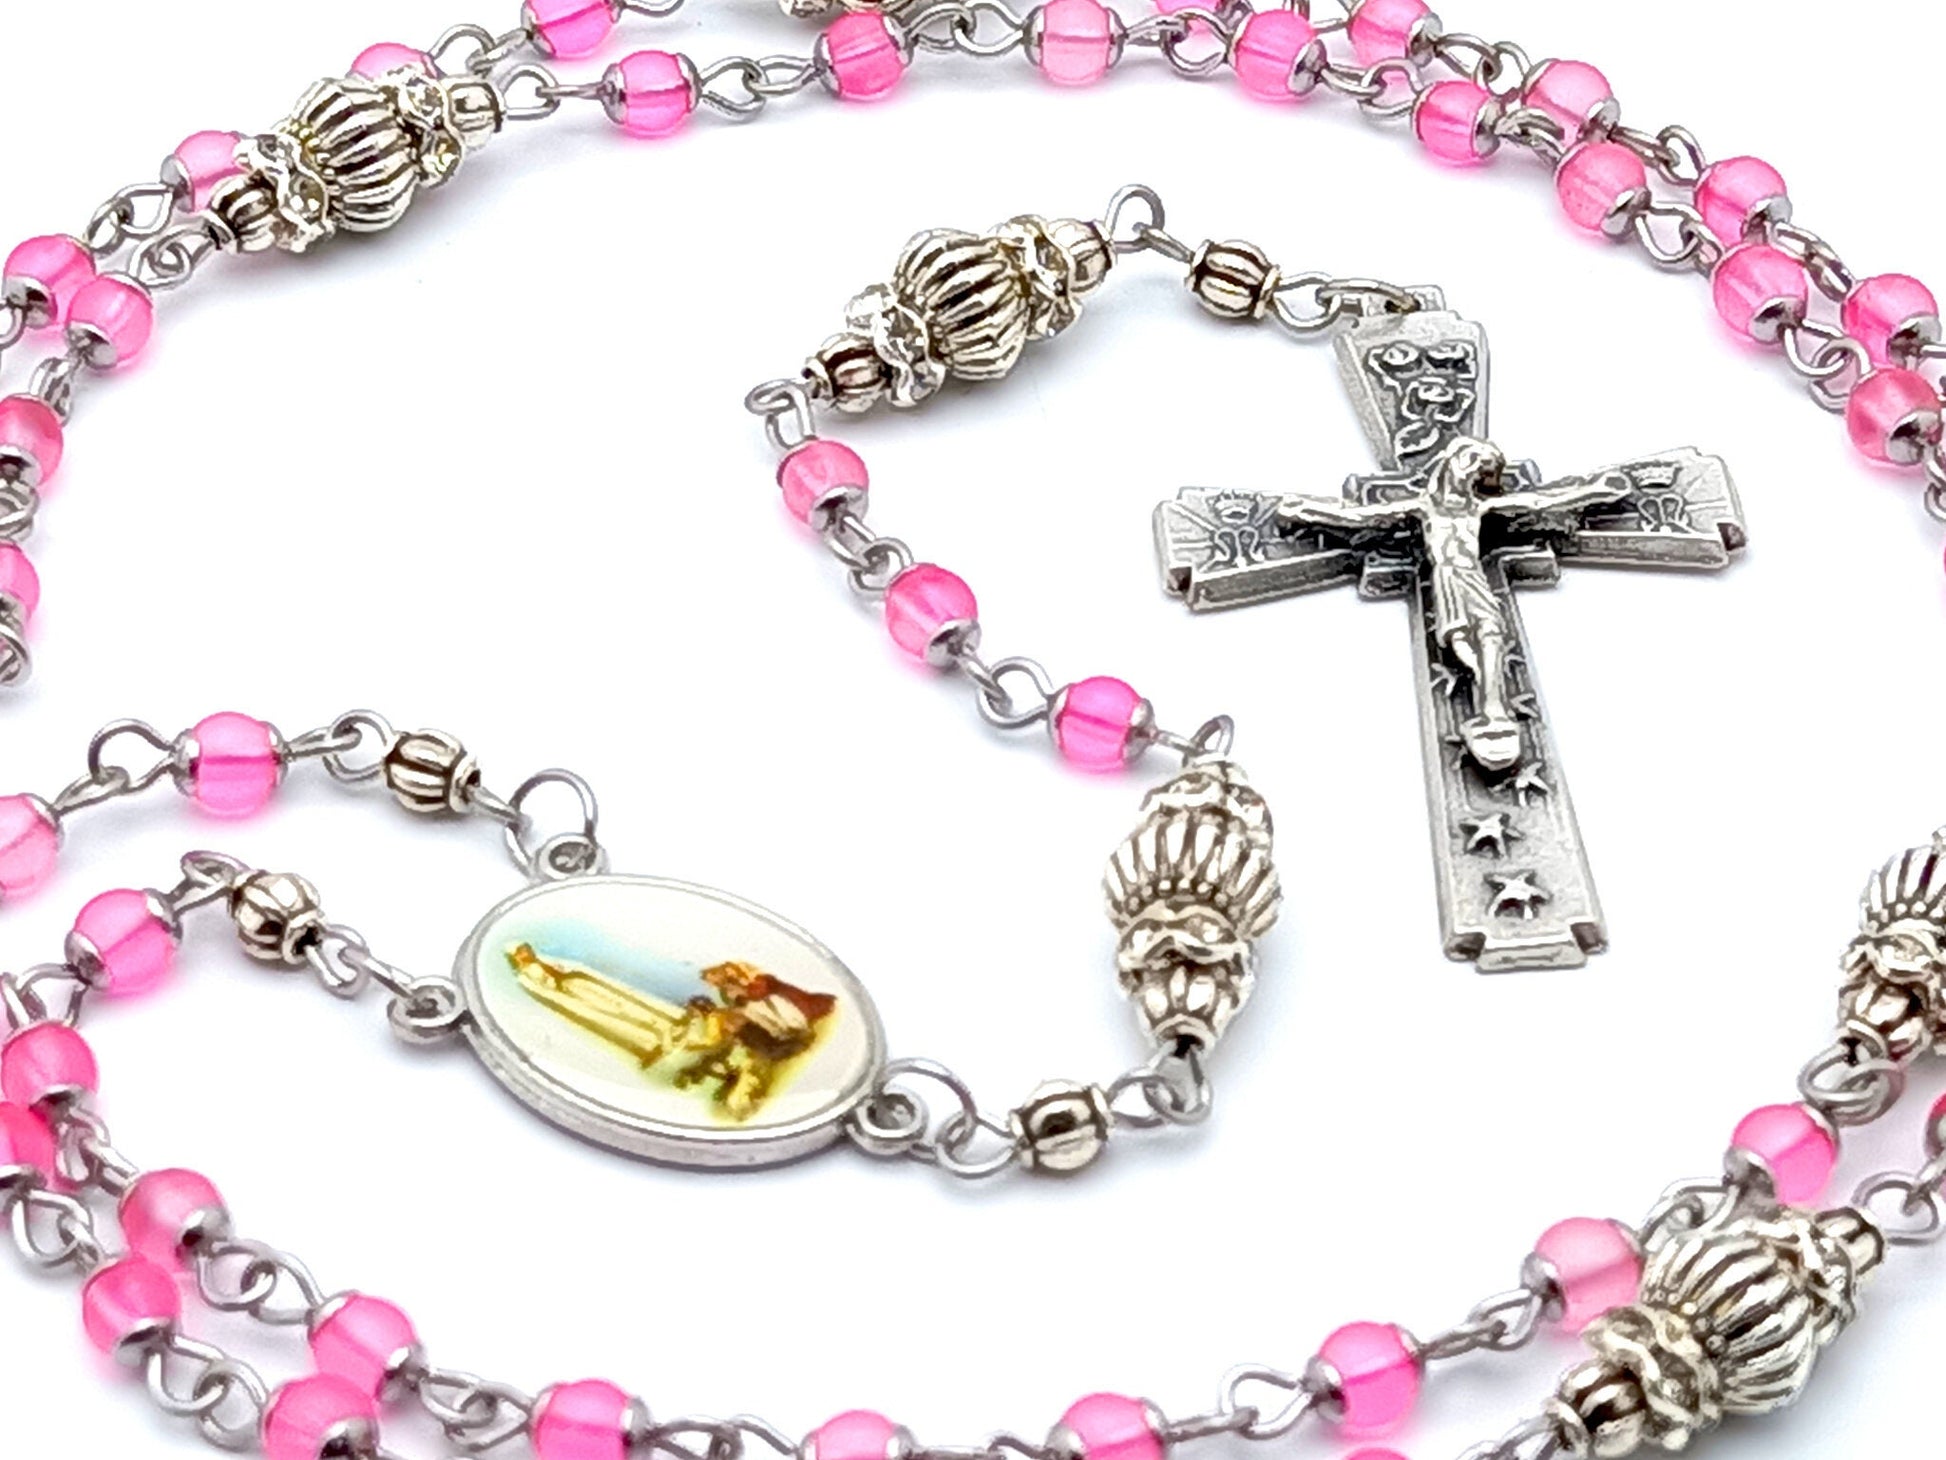 Our Lady of Fatima unique rosary beads miniature rosary with small pink glass and silver beads, silver crucifix and picture centre medal.